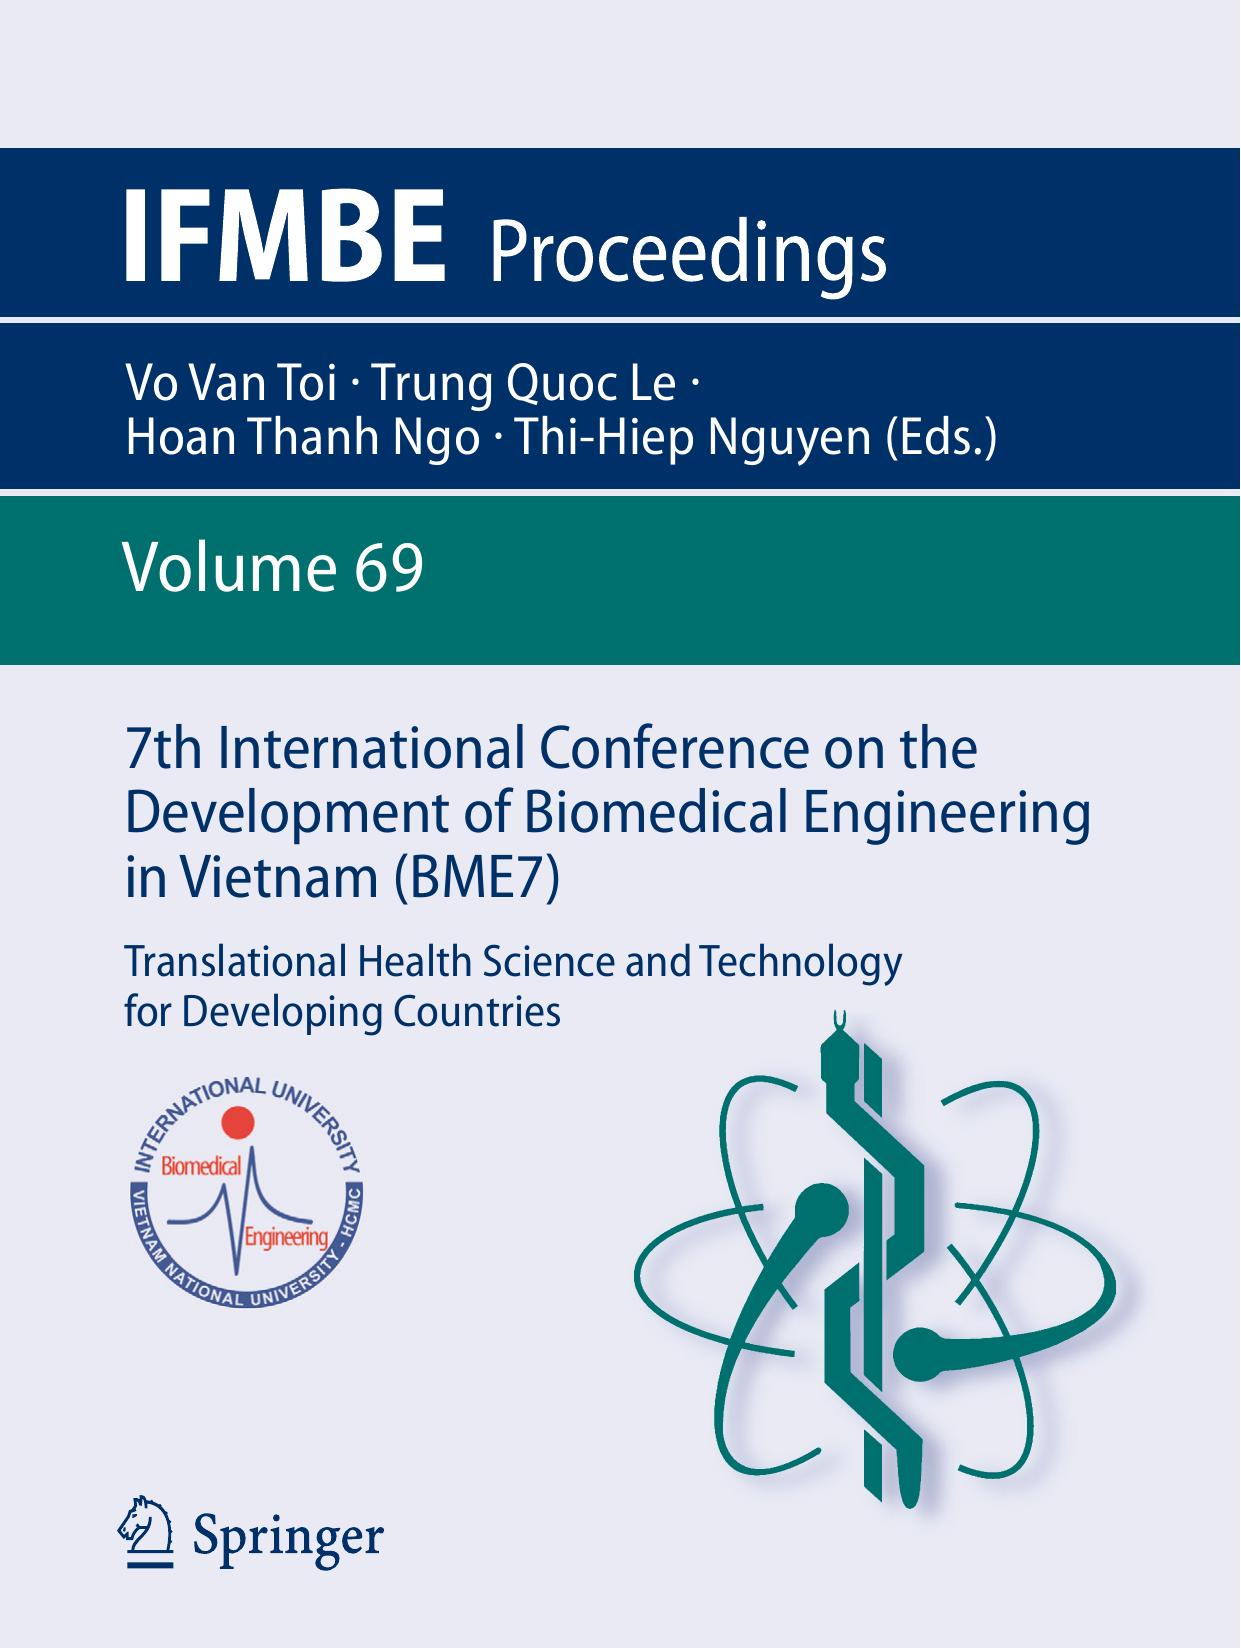 IFMBE Proceeding 7th International Conference 2019